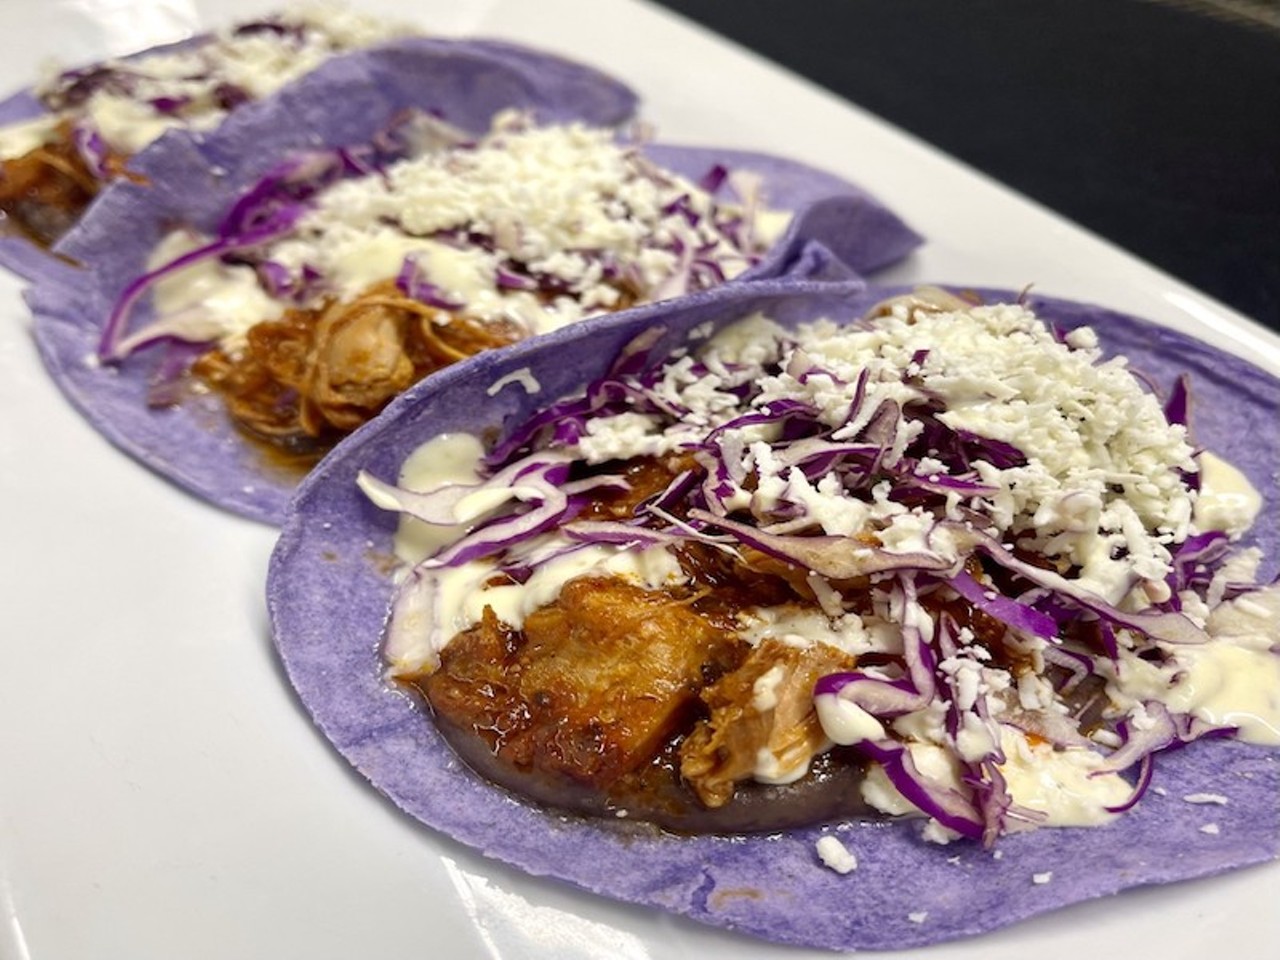 El Catrin Mexican Kitchen
7773 Highway 311, Sellersburg
The Tinga Taco: Chipotle-braised chicken, refried black beans, caramelized onion, red cabbage, avocado salsa, queso fresco.